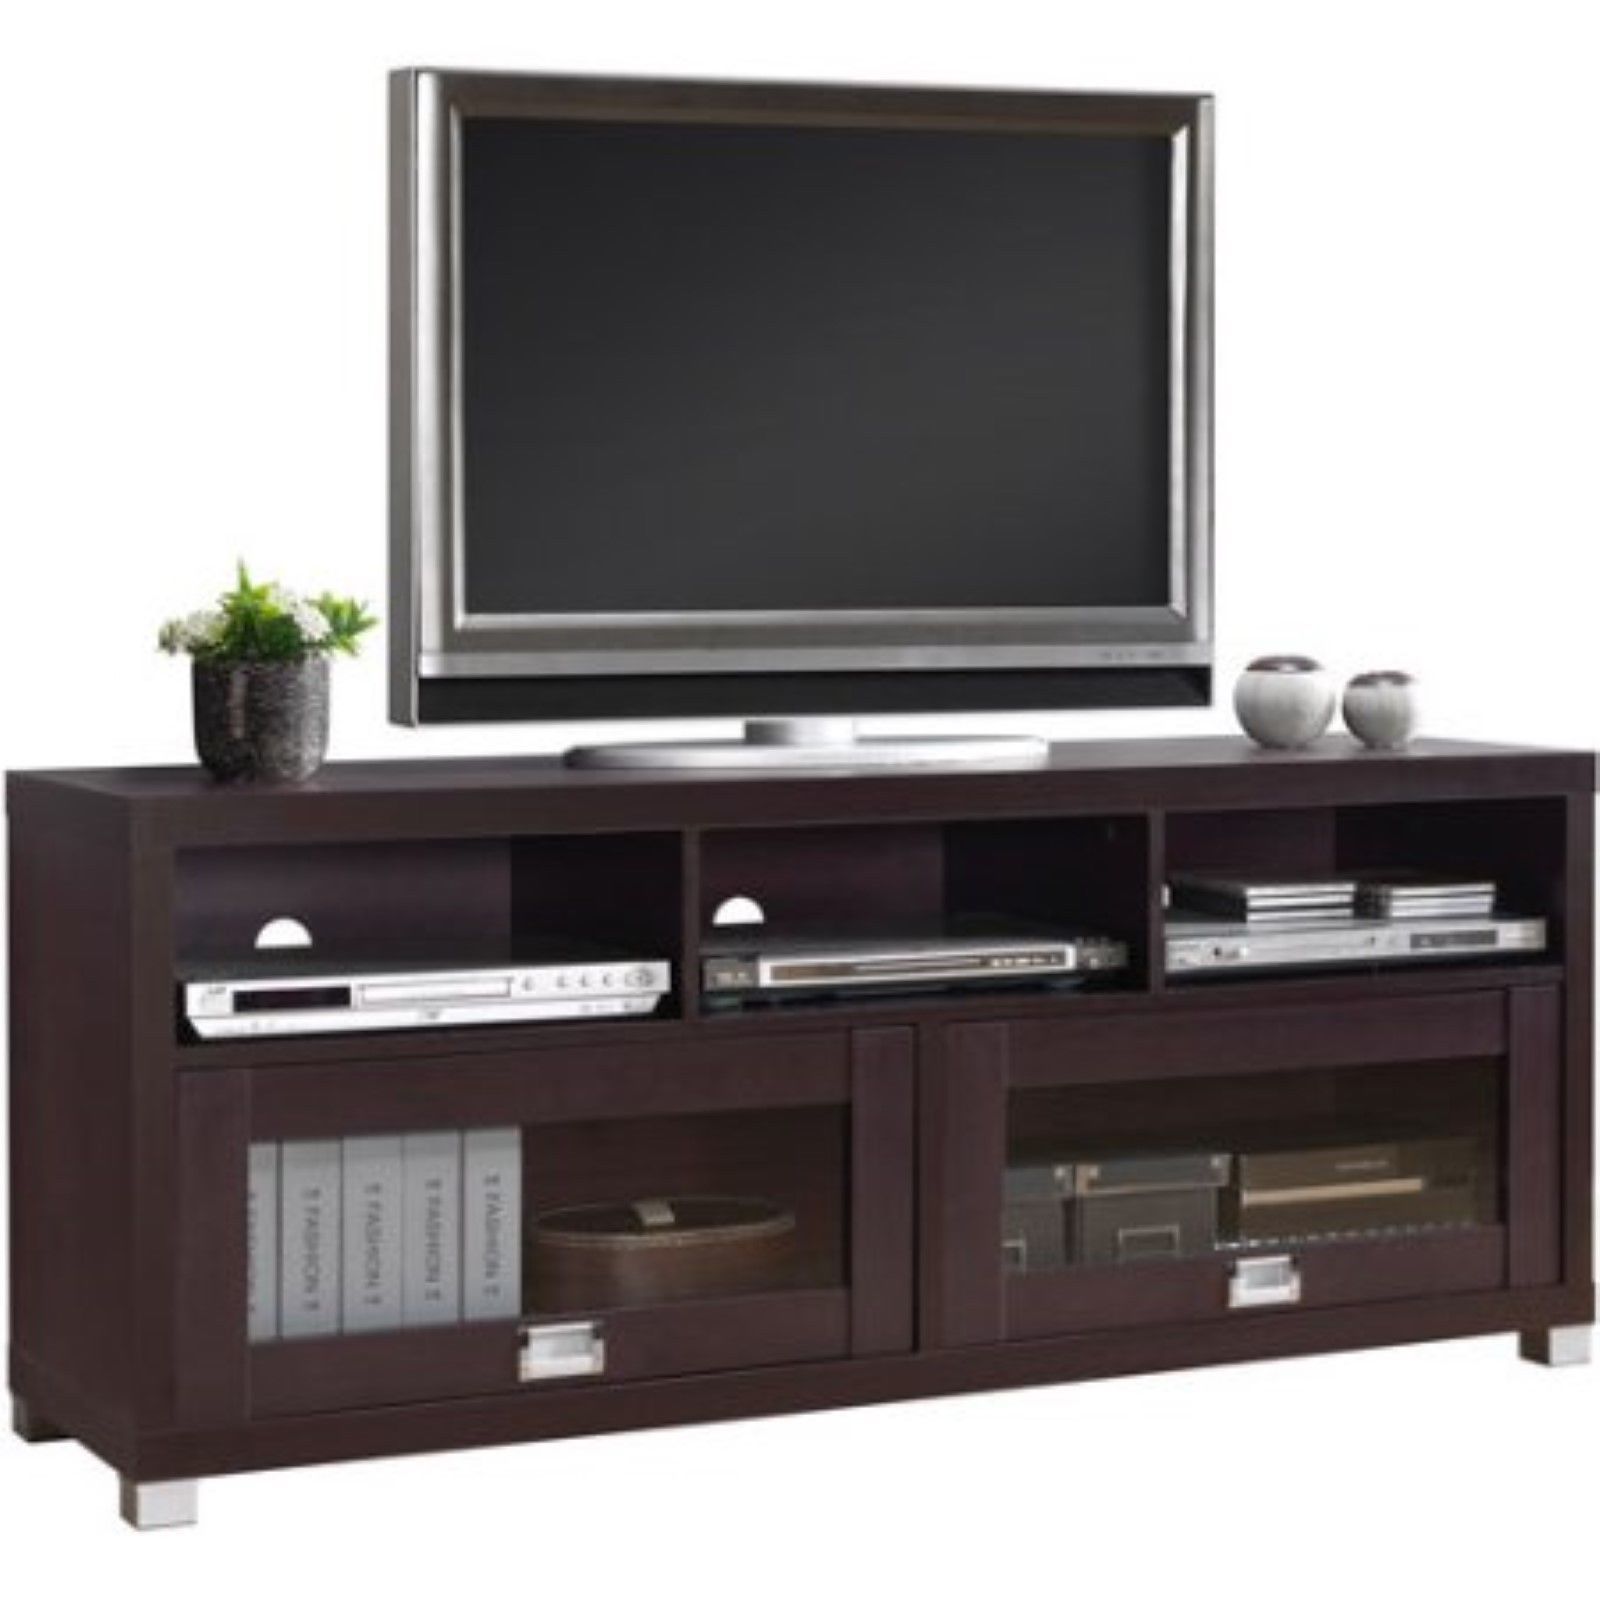 Tv Stand 65 Inch Flat Screen Home Furniture Entertainment Inside Contemporary Tv Cabinets For Flat Screens (View 2 of 15)